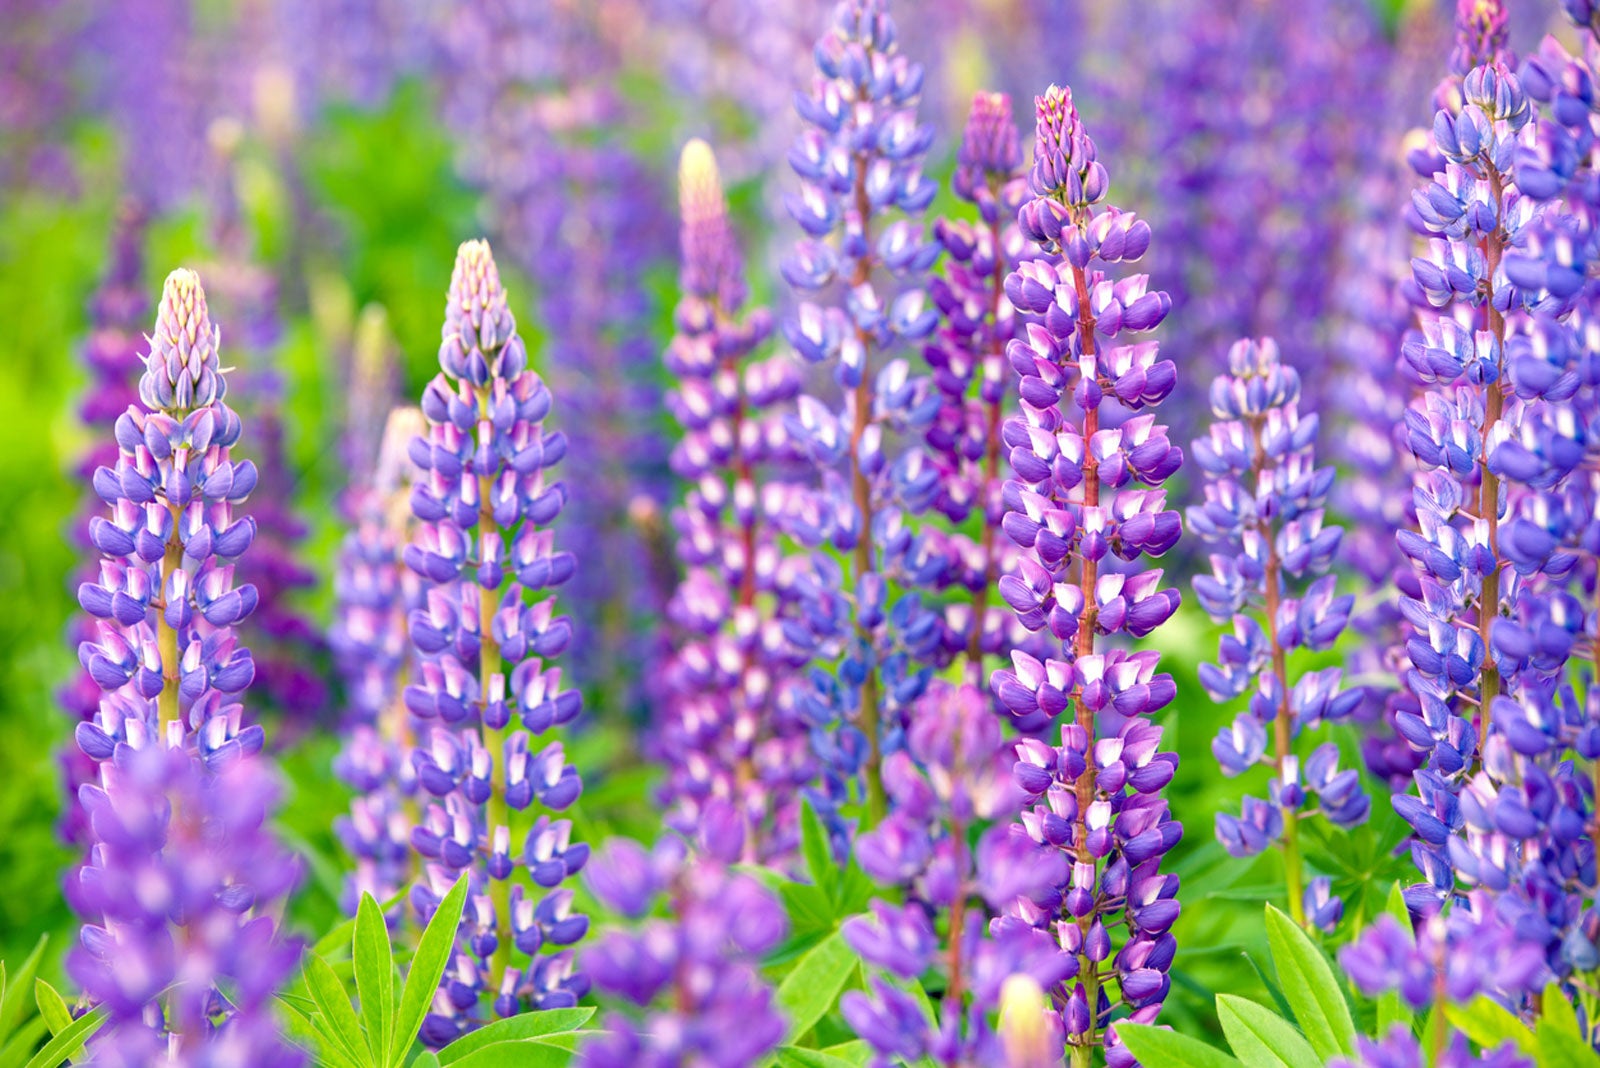 Benefits of Growing Lupine Flowers